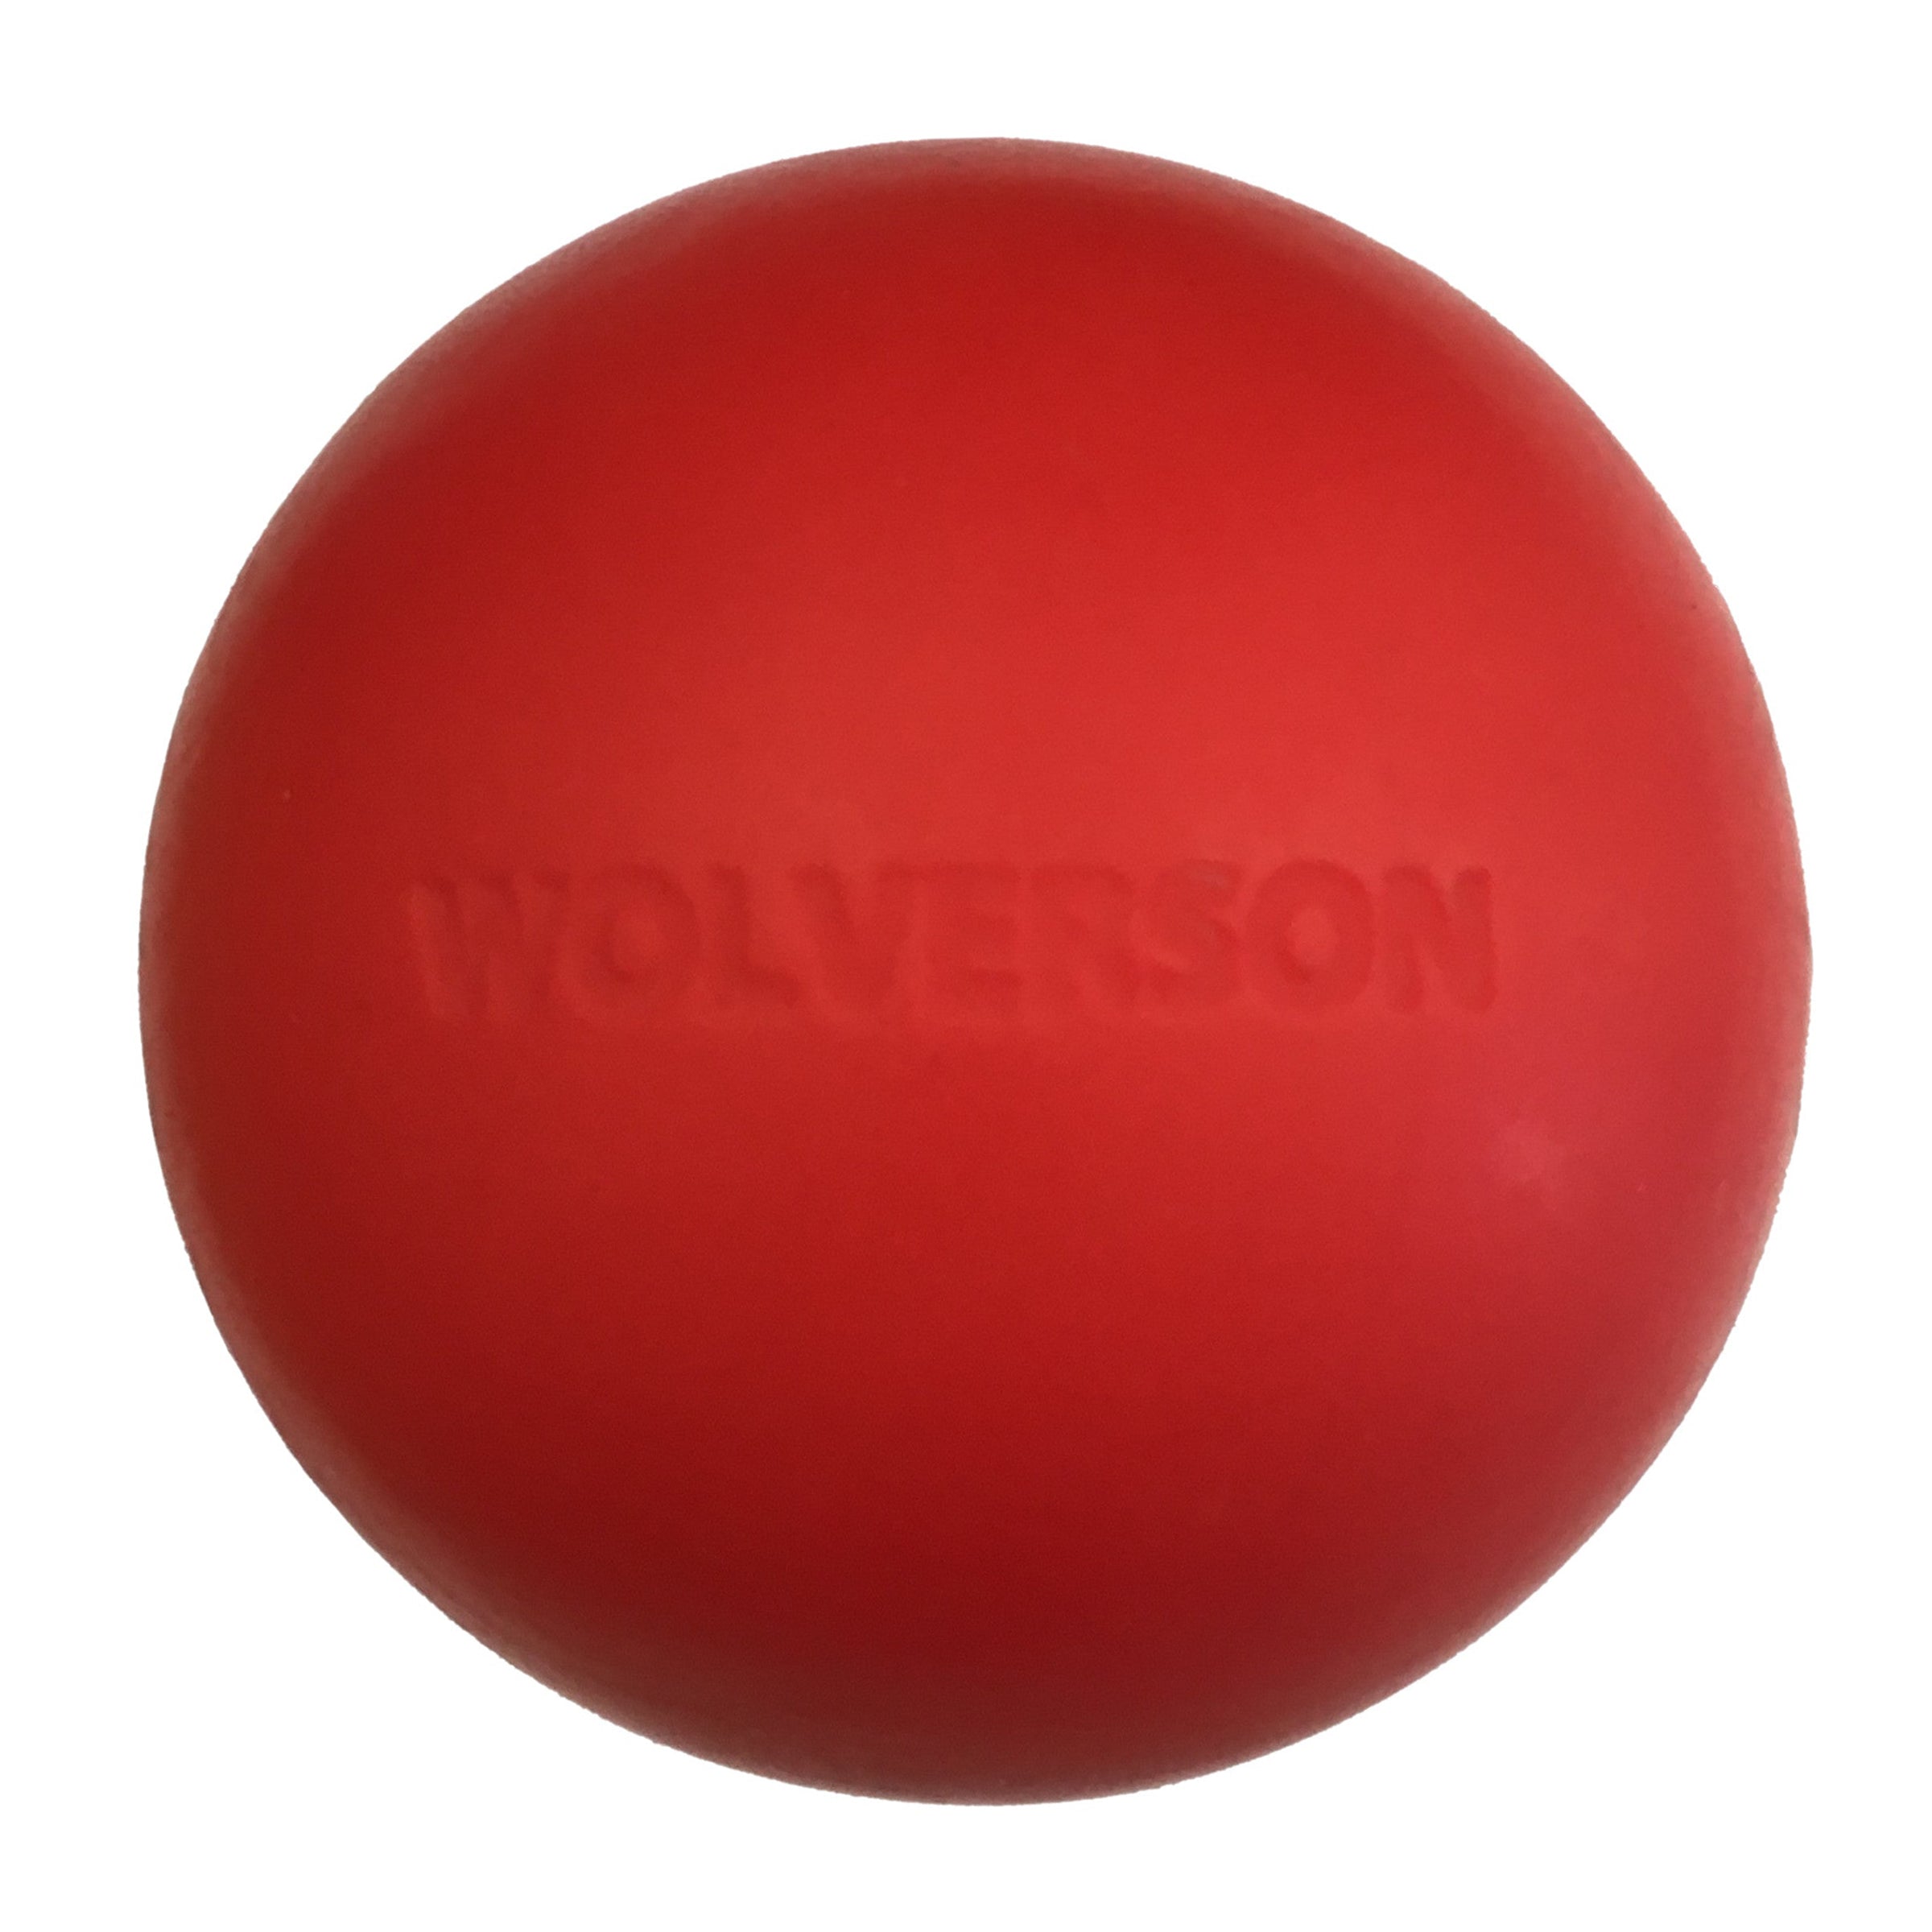 Lacrosse balls / Myofascial release / Mobility tool - Wolverson Fitness